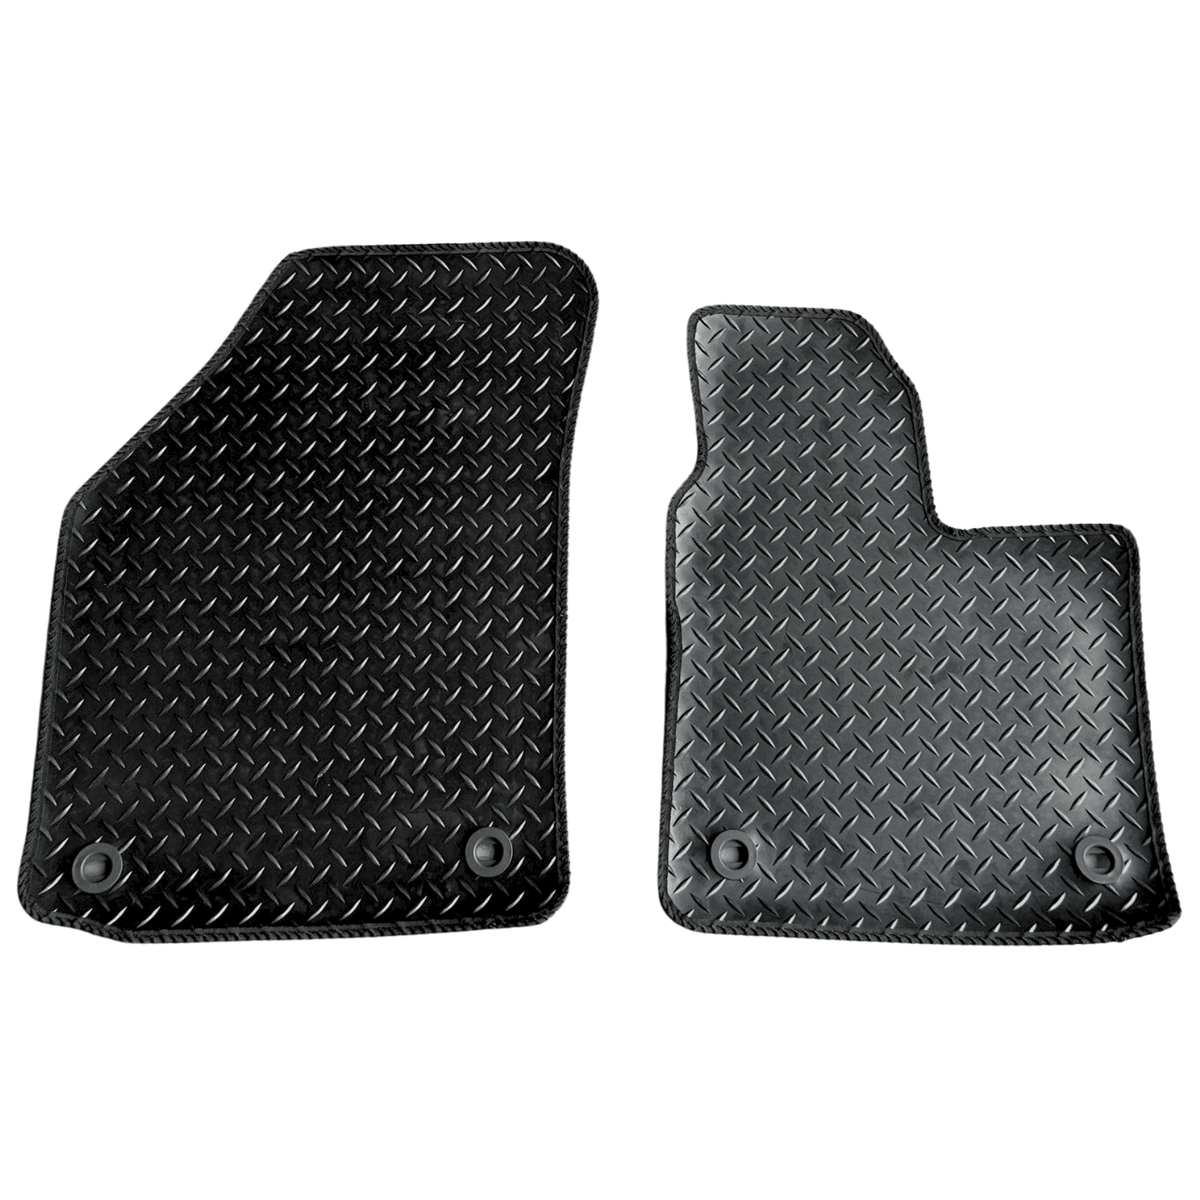 VW CADDY 2021 ON TAILORED RUBBER FLOOR MATS - Storm Xccessories2